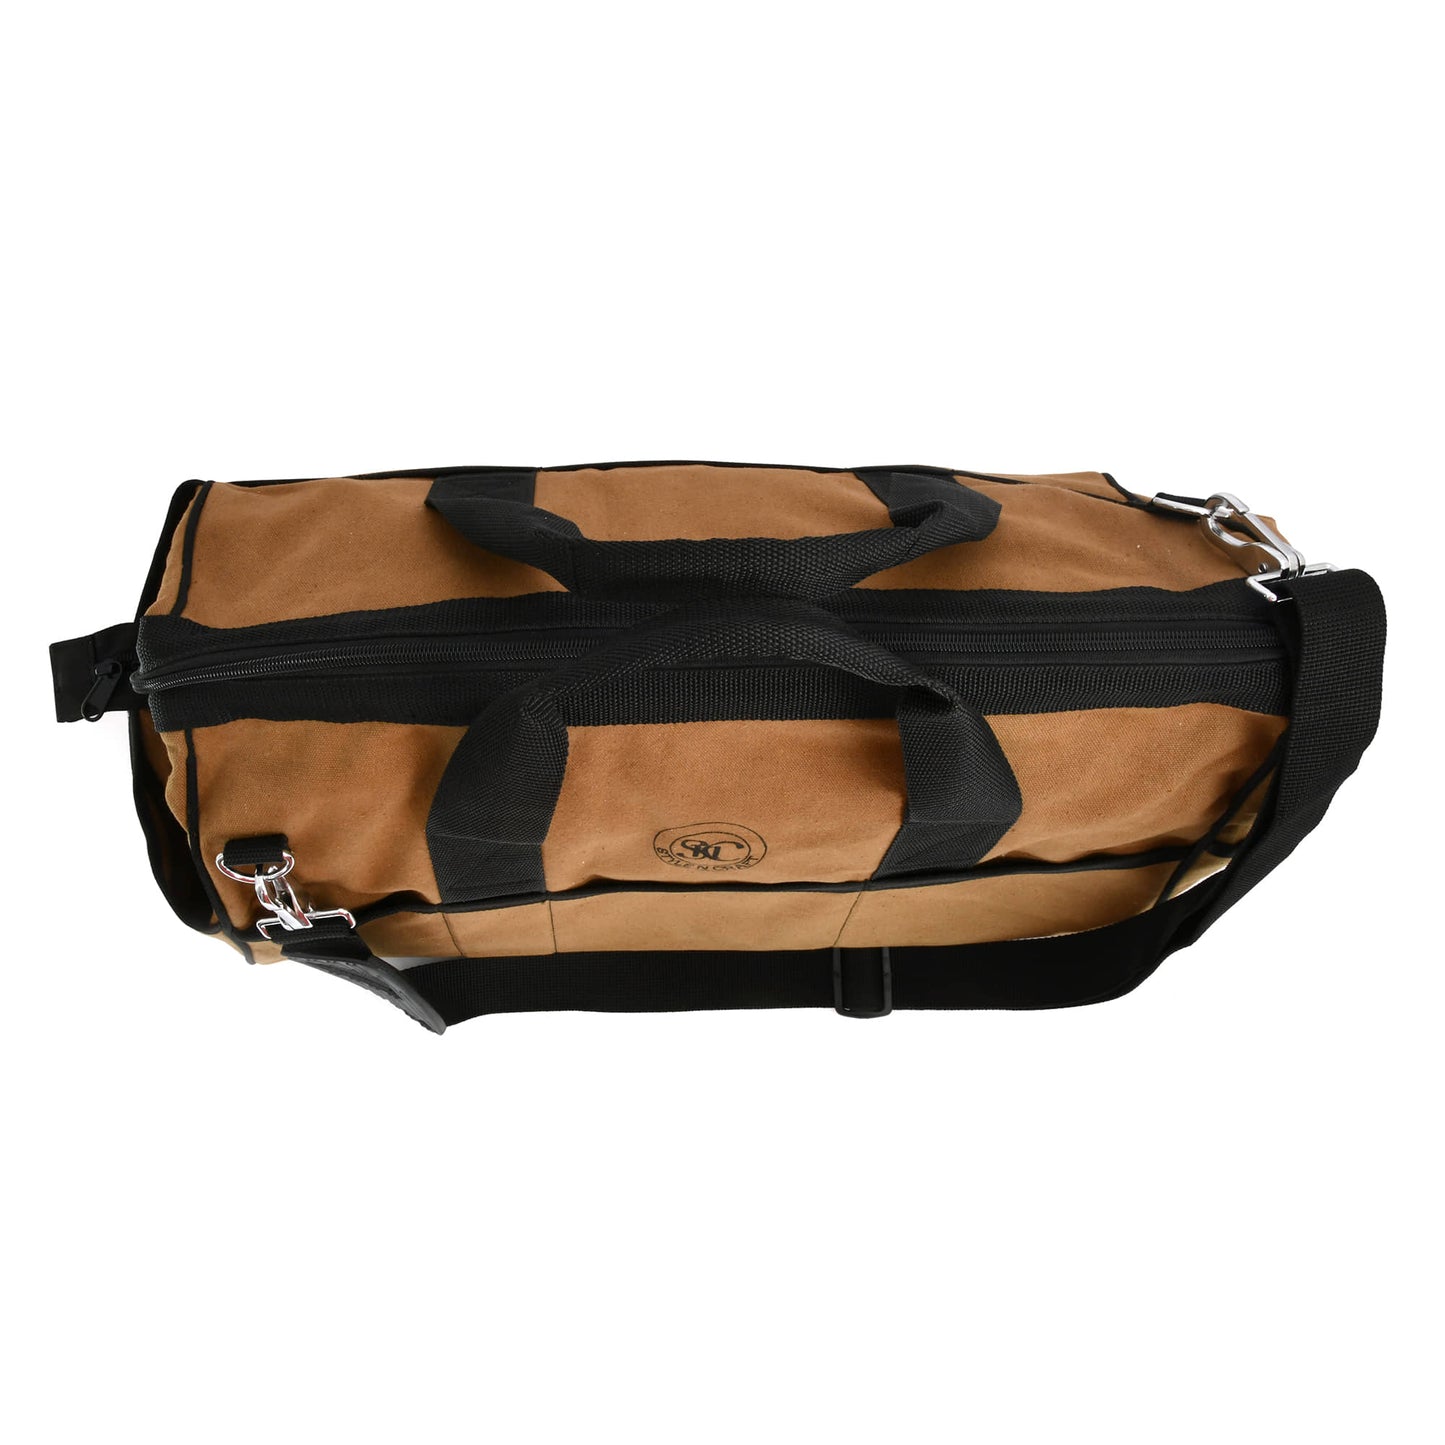 Style n Craft 97012 - 25 Pocket 20 Inch Wide Mouth Tool Bag in Brown Waterproof Canvas with Black Binding - External Top View of the Tool Bag